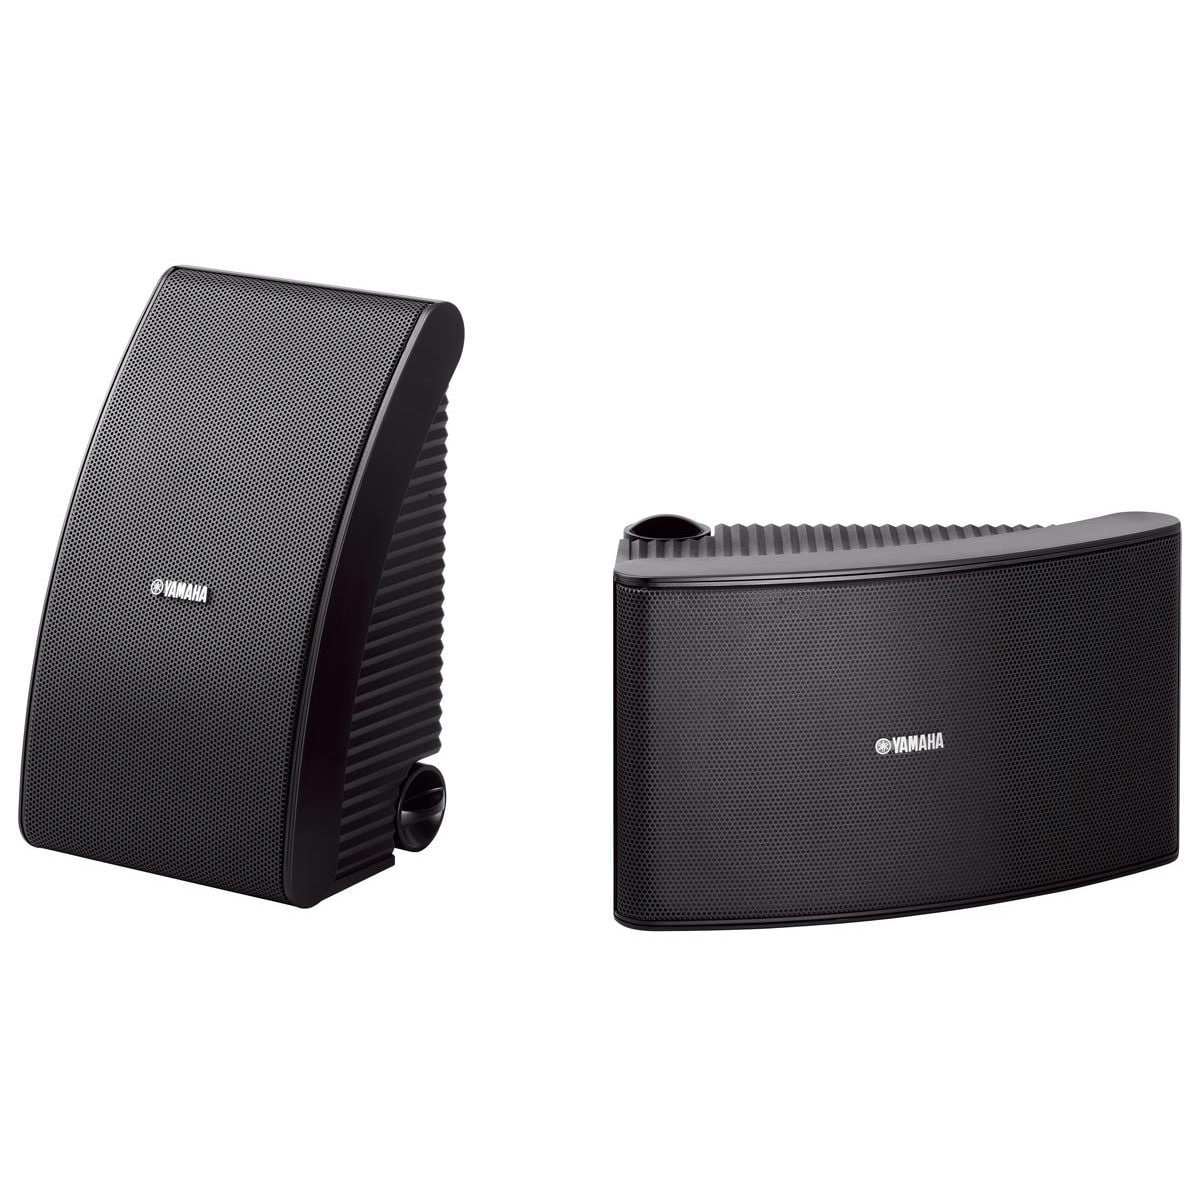 Yamaha NS-AW592 - Outdoor Speakers medium size outdoor speaker system that combines quality and durability, and provides a wide variety of installation options. Flexible installation options with supplied mounting brackets